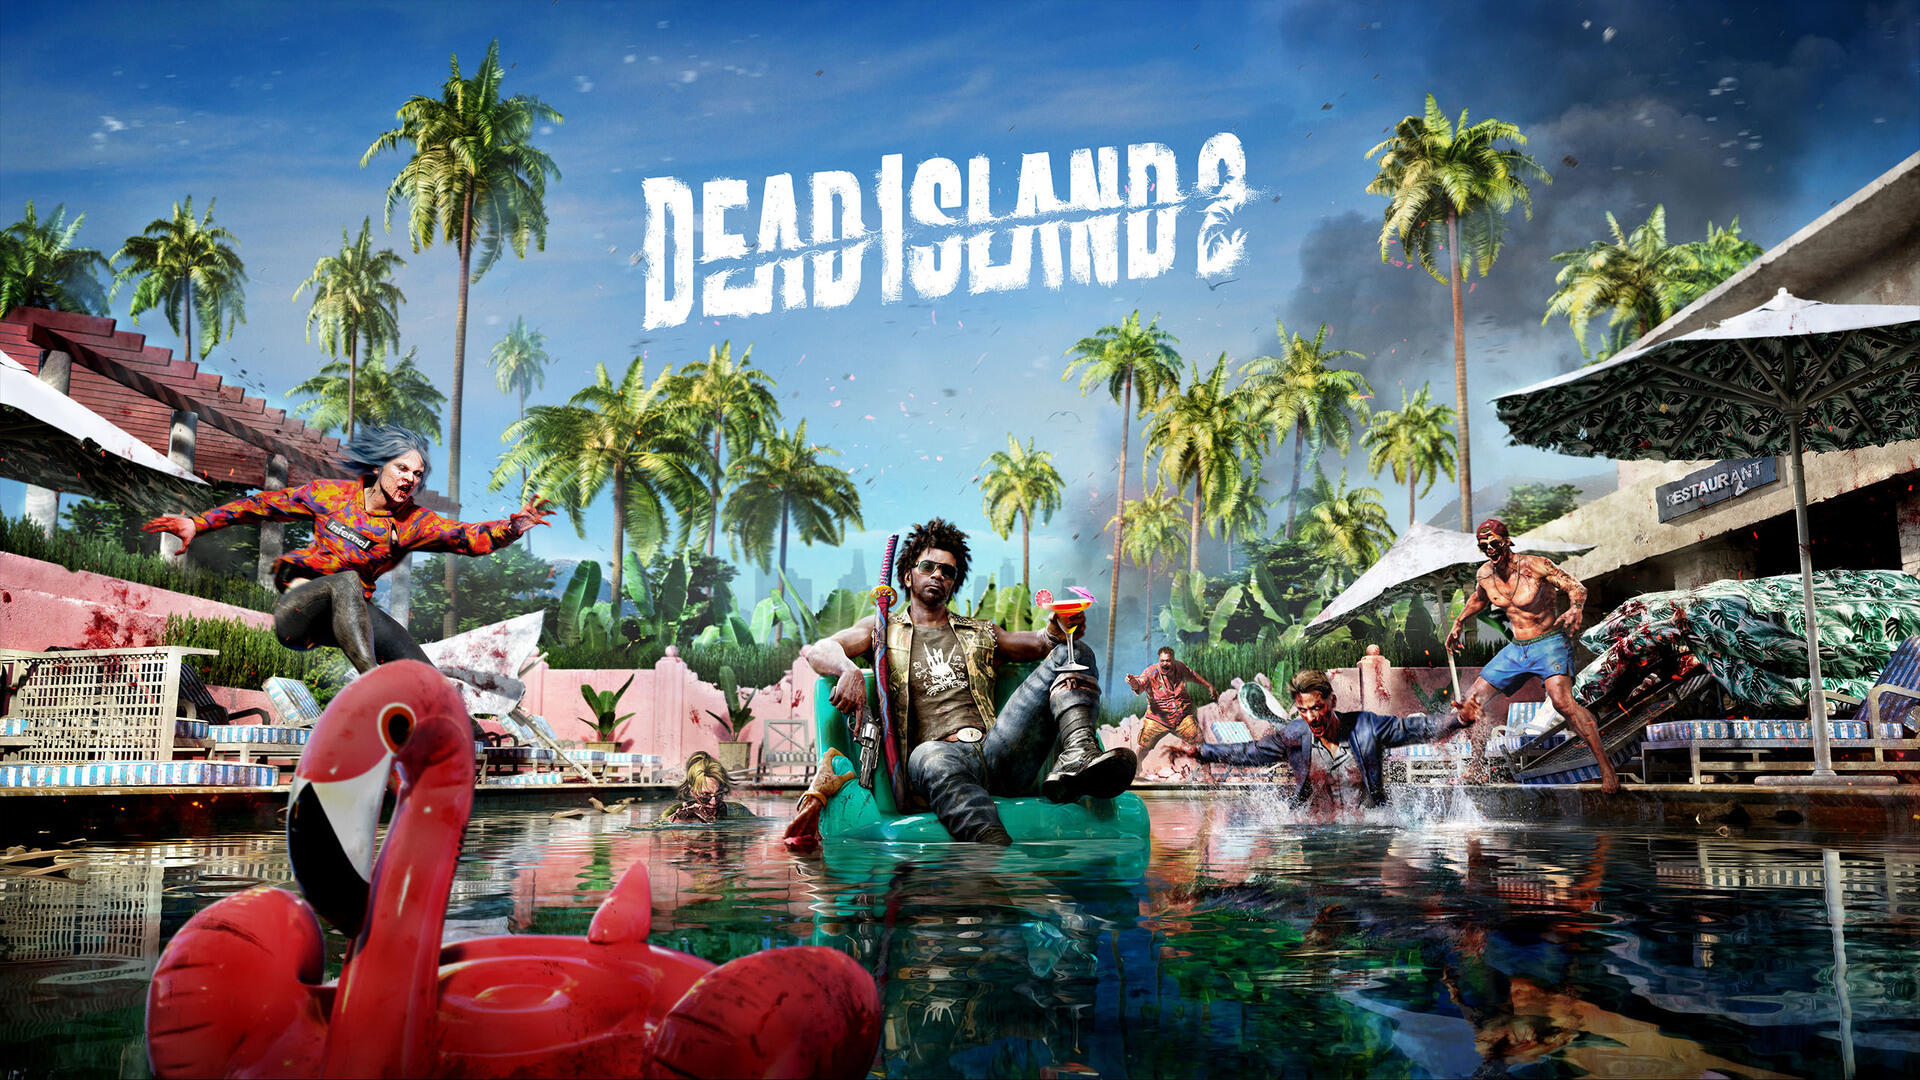 Dead island 2 (with online fix) (v1.1062983.0.1)